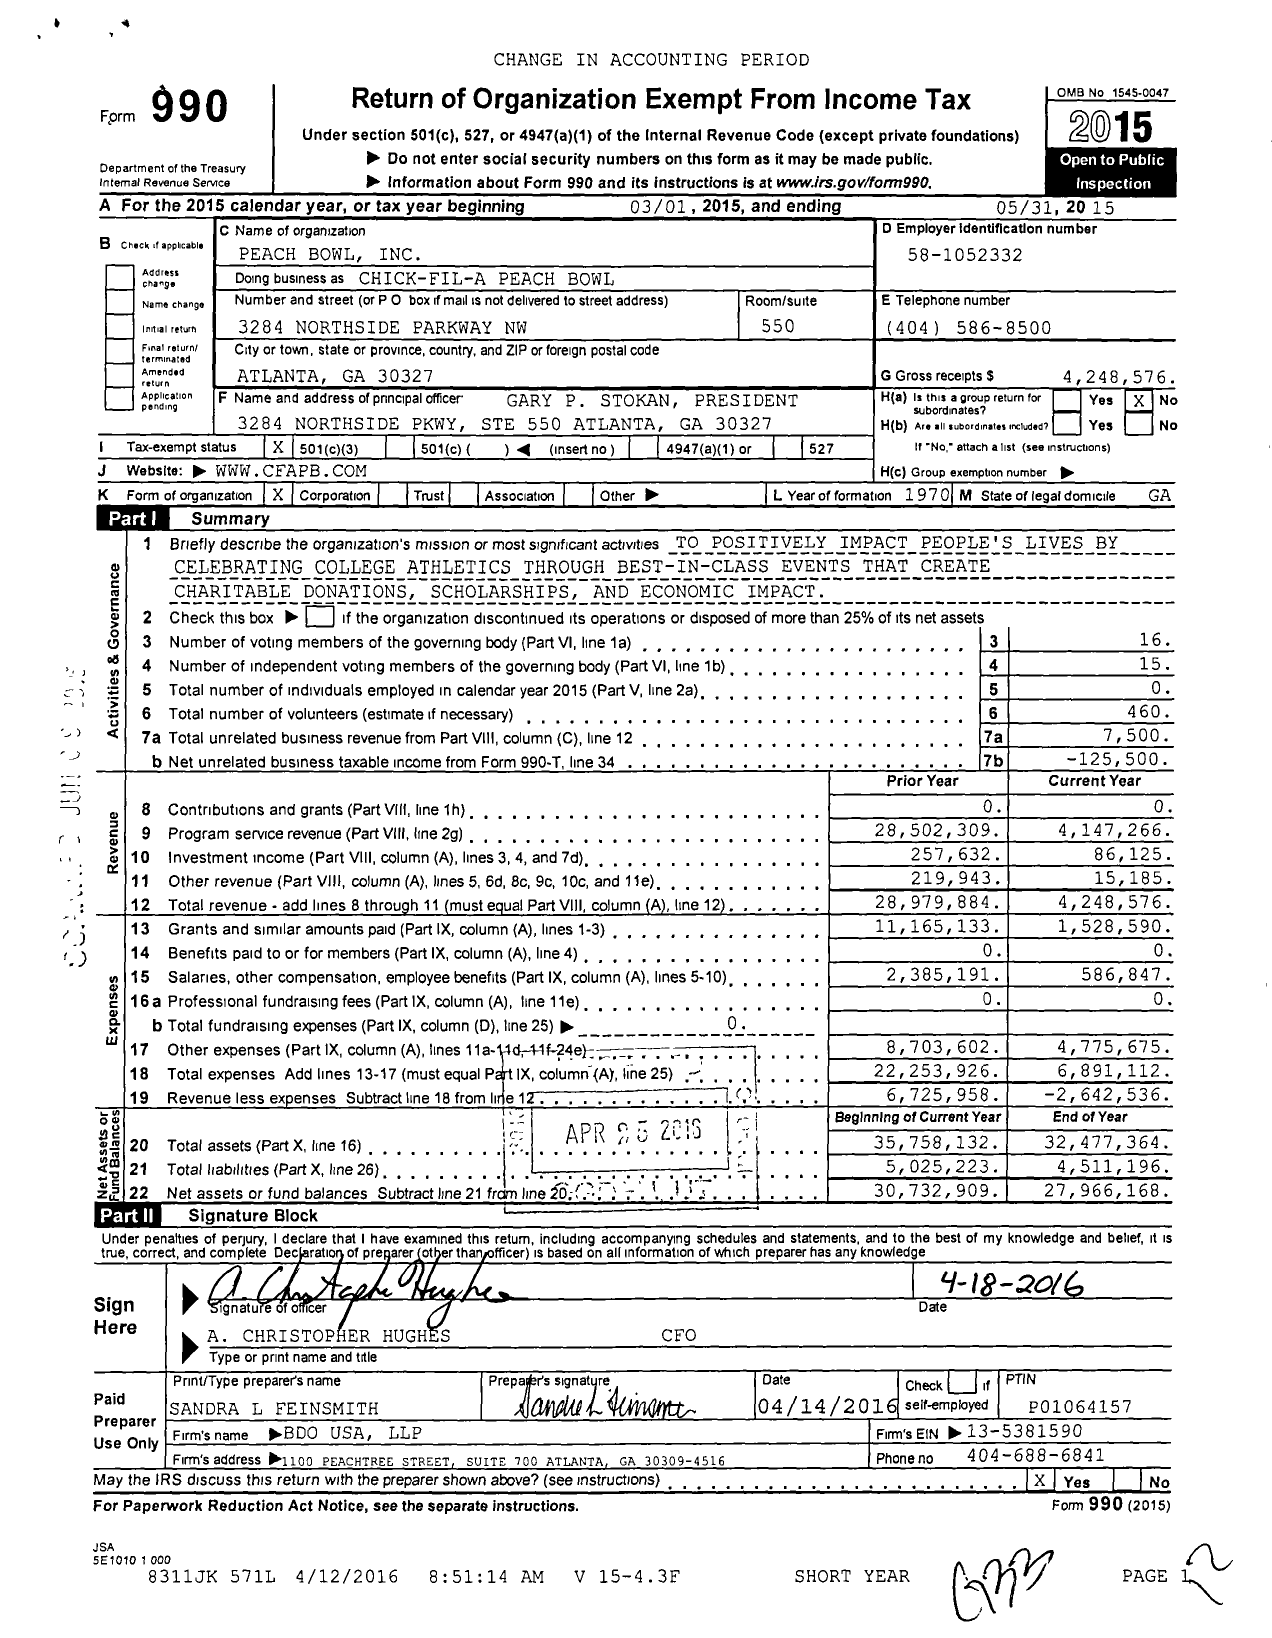 Image of first page of 2014 Form 990 for Chick-fil-A Peach Bowl